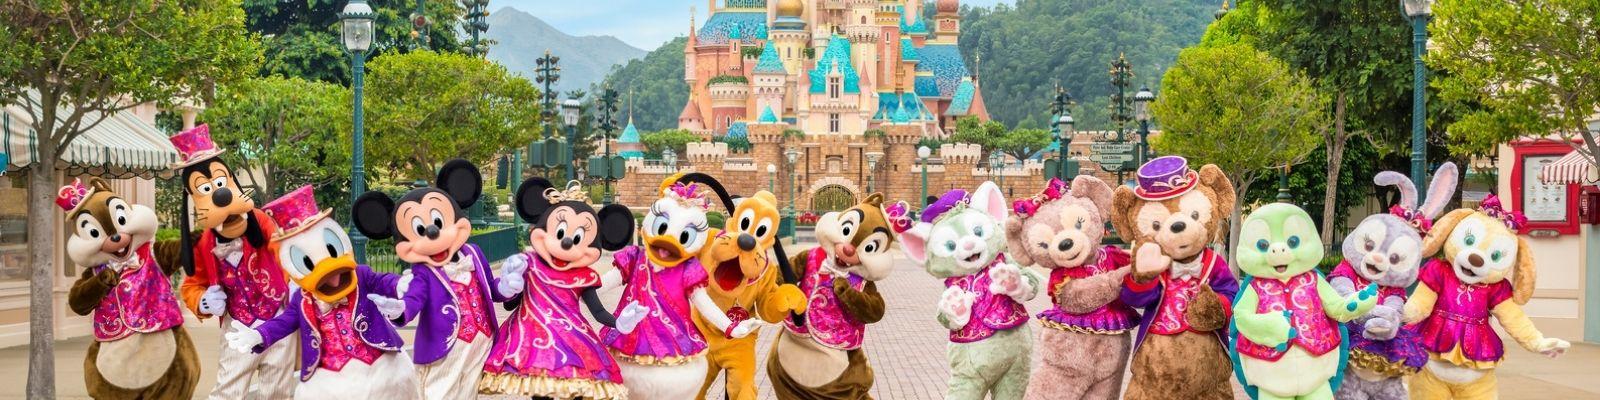 Disney characters at Hong Kong Disneyland in front of the Castle of Magical Dreams